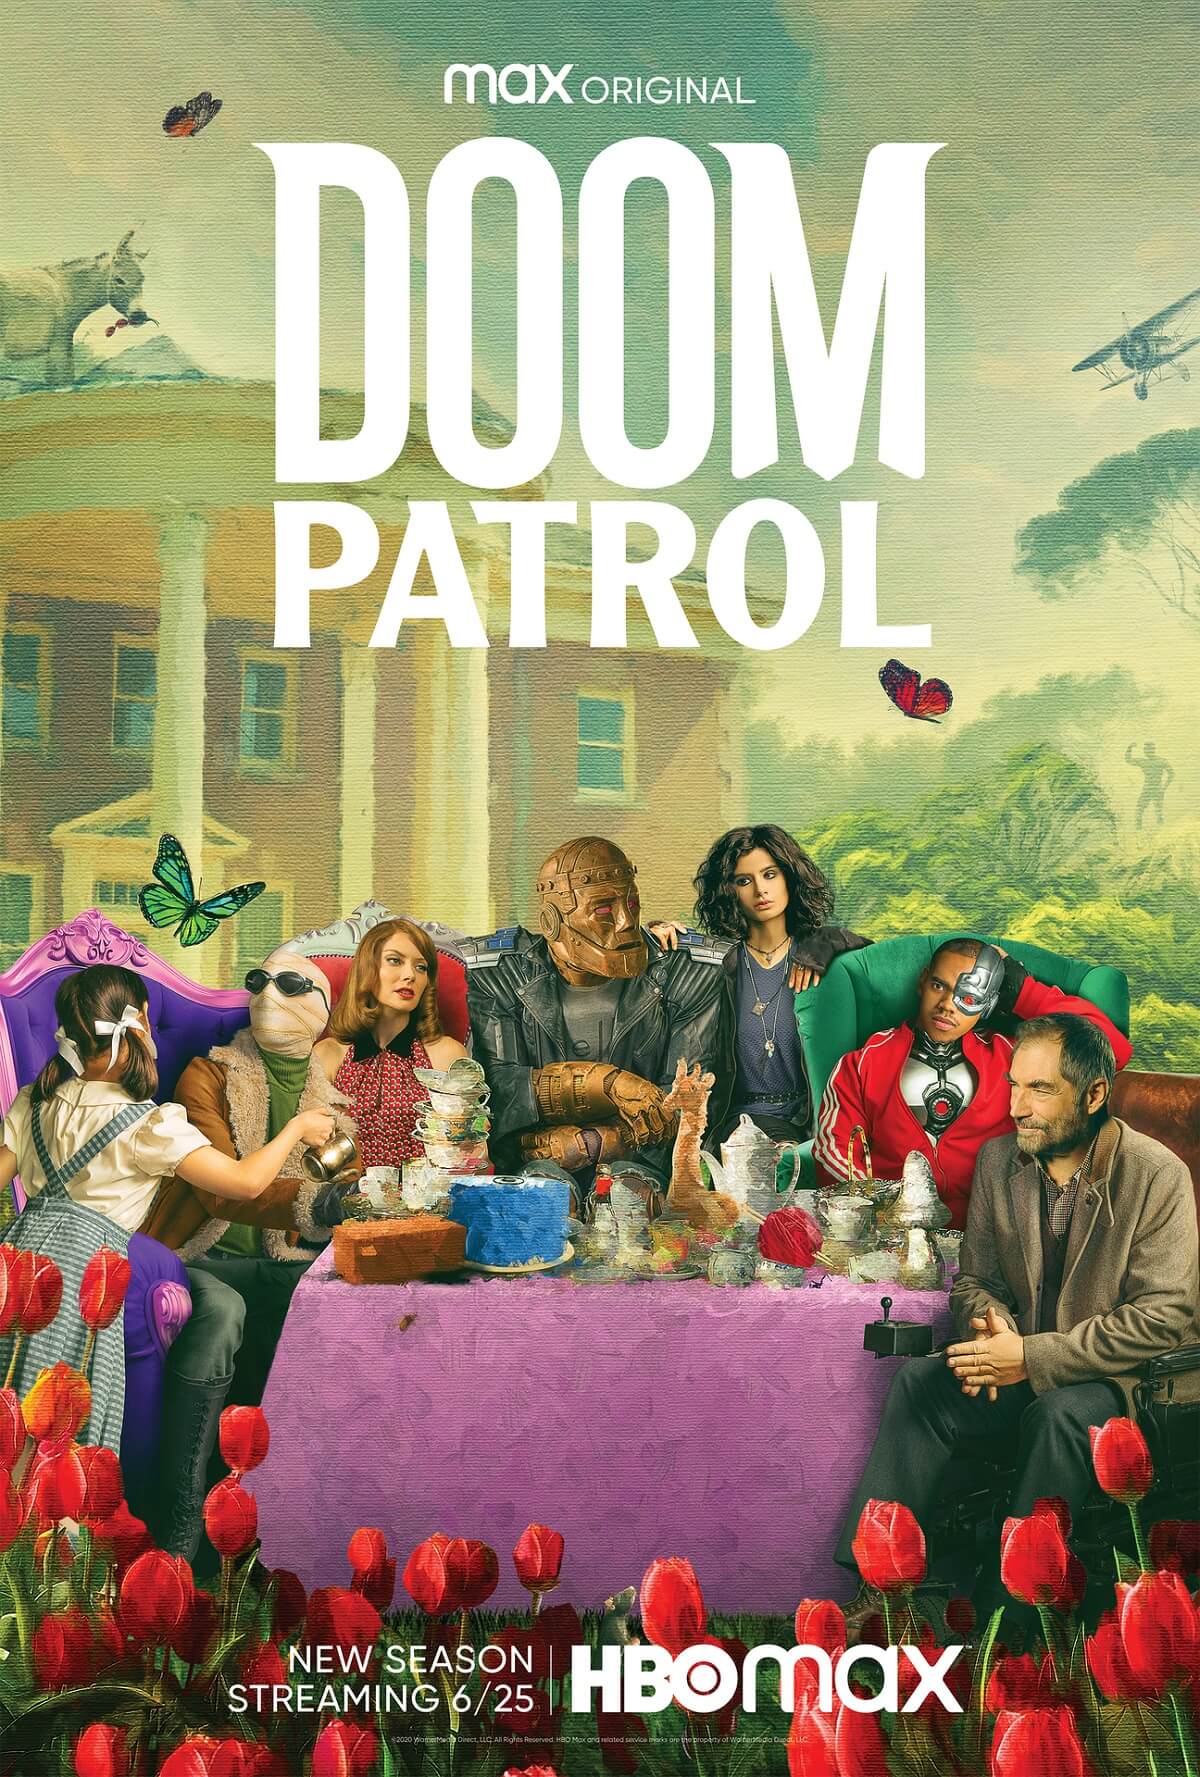 Poster featuring the main characters of Doom Patrol